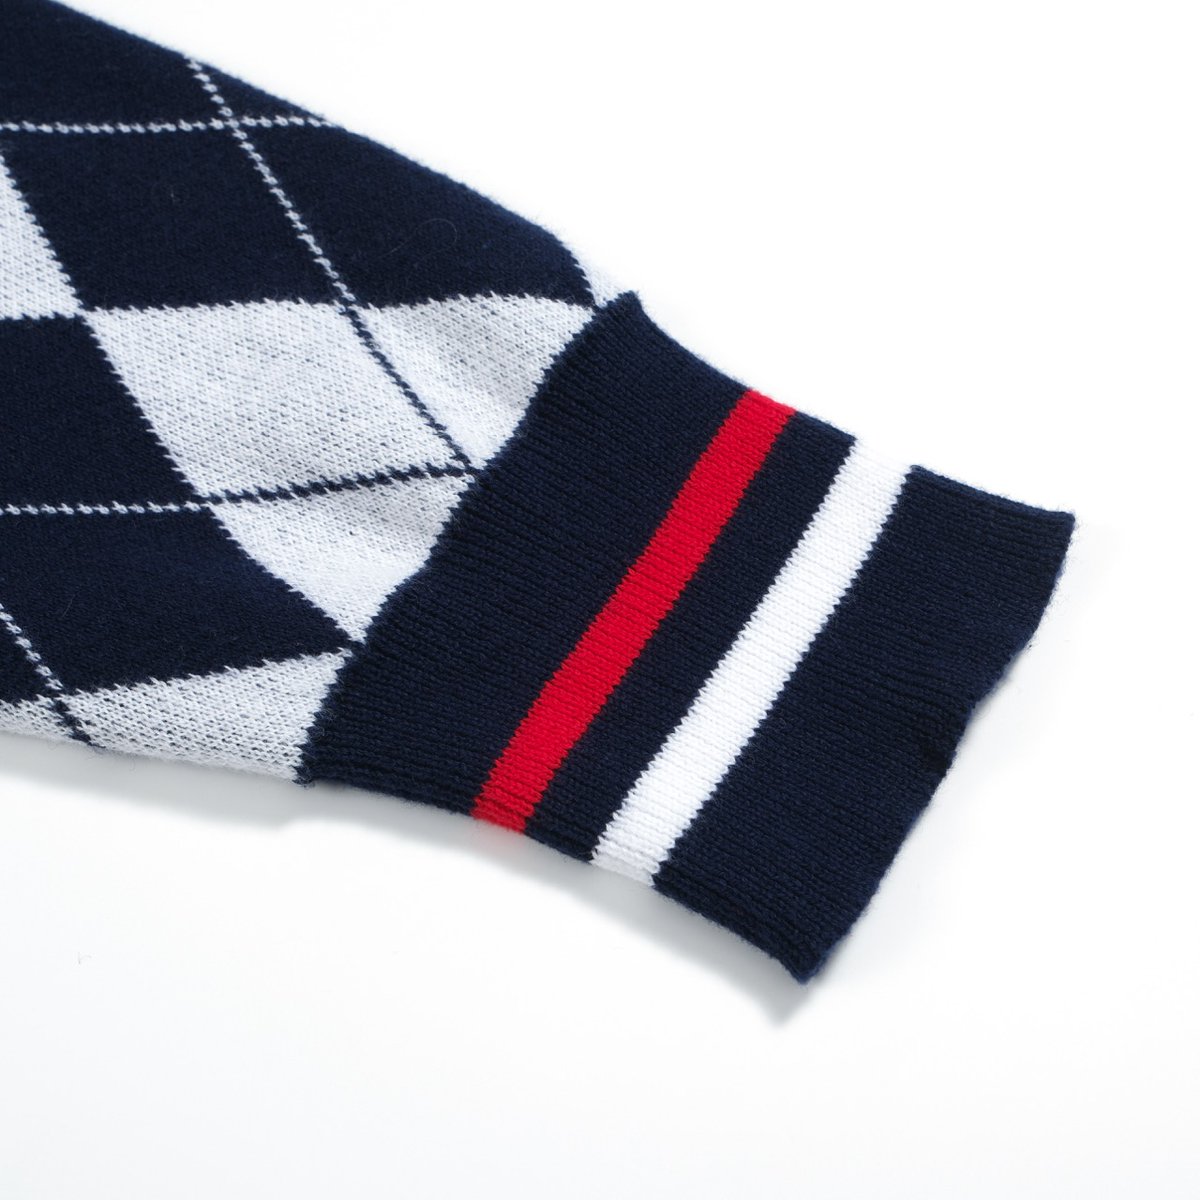 Checkmate! 🏁 Ace your style game with our argyle sweater. Perfect for any casual or classy setup. 
📷oxknit.com
#retro  #oxknit #oxknitstore #MenFashion  #KnittedWear #StyleCheck #ArgyleLove #FashionForward #TrendyKnits #OutfitGoals